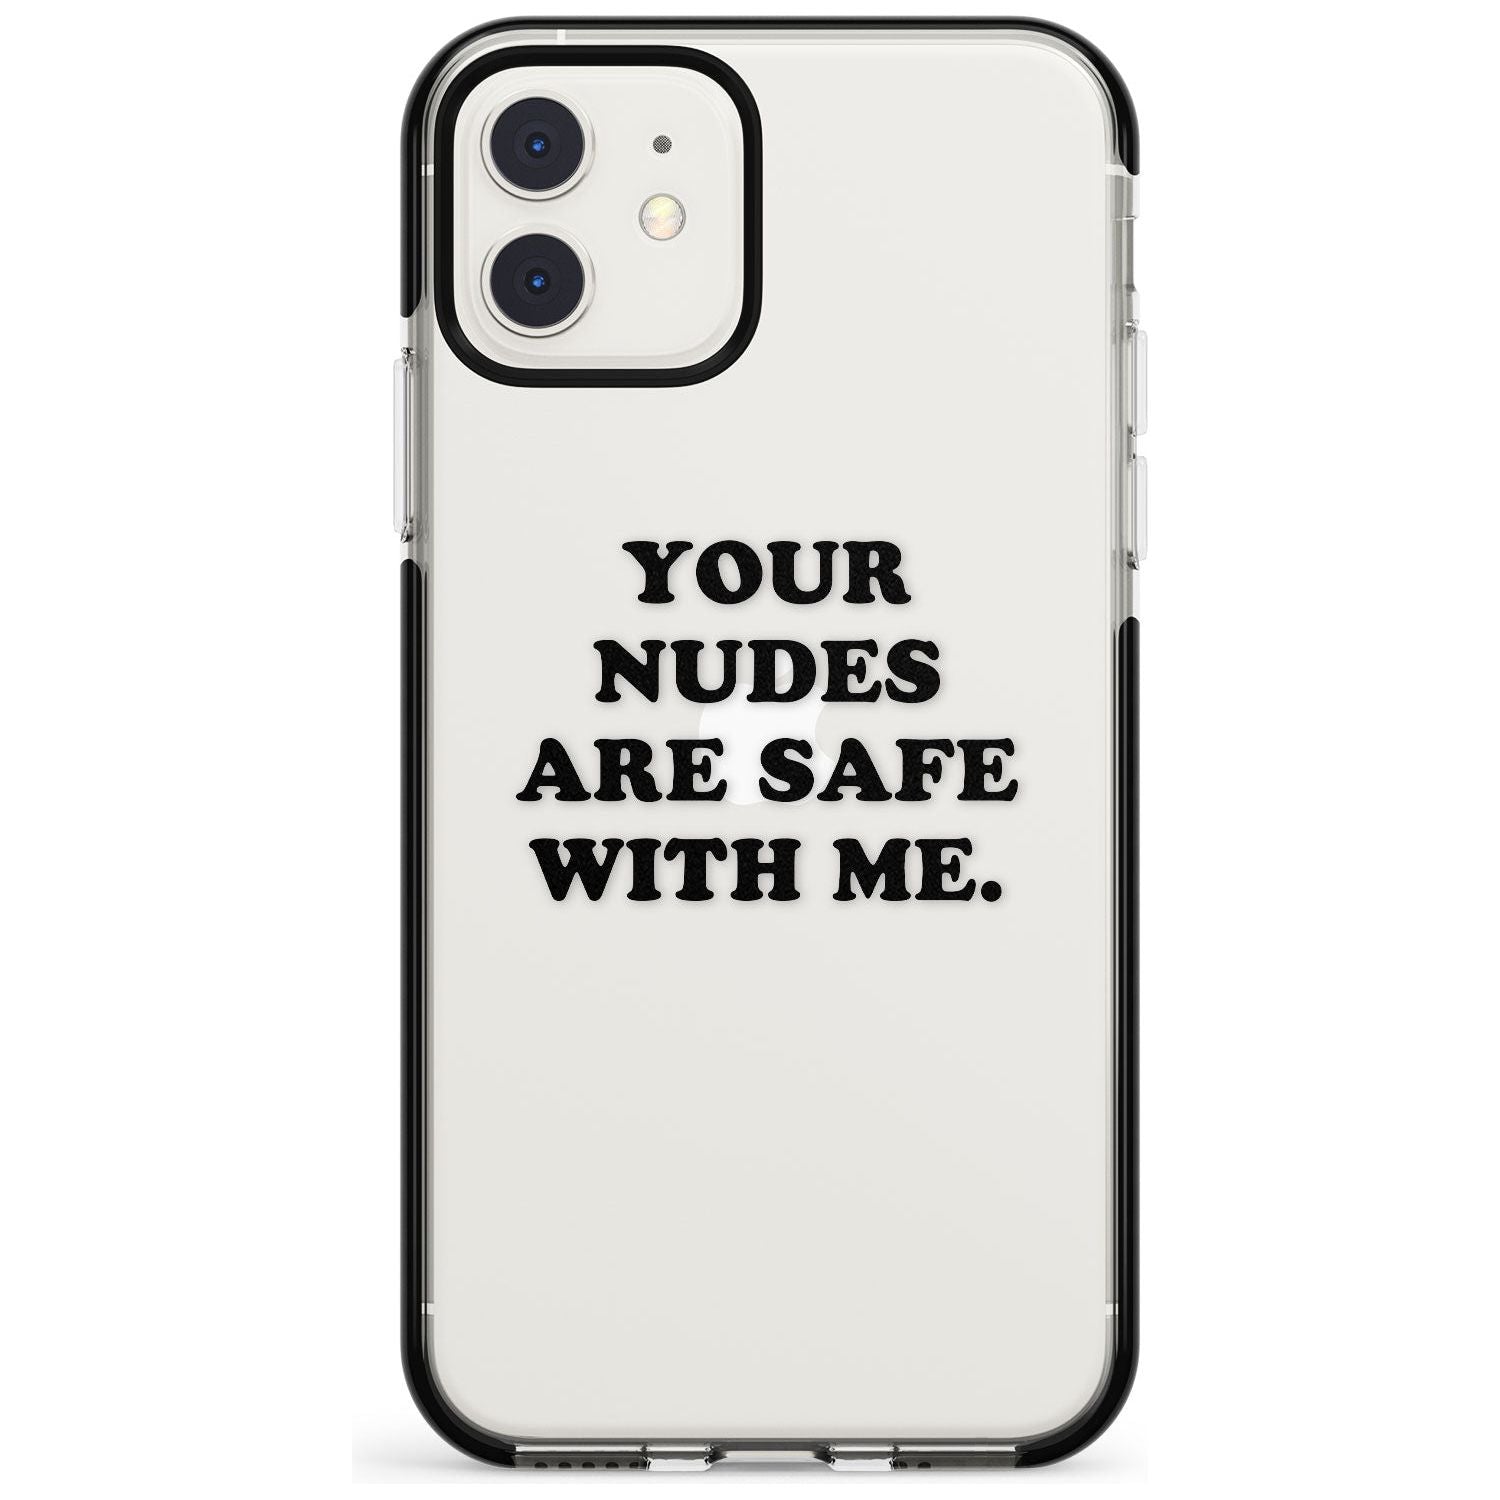 Your nudes are safe with me... BLACK Black Impact Phone Case for iPhone 11